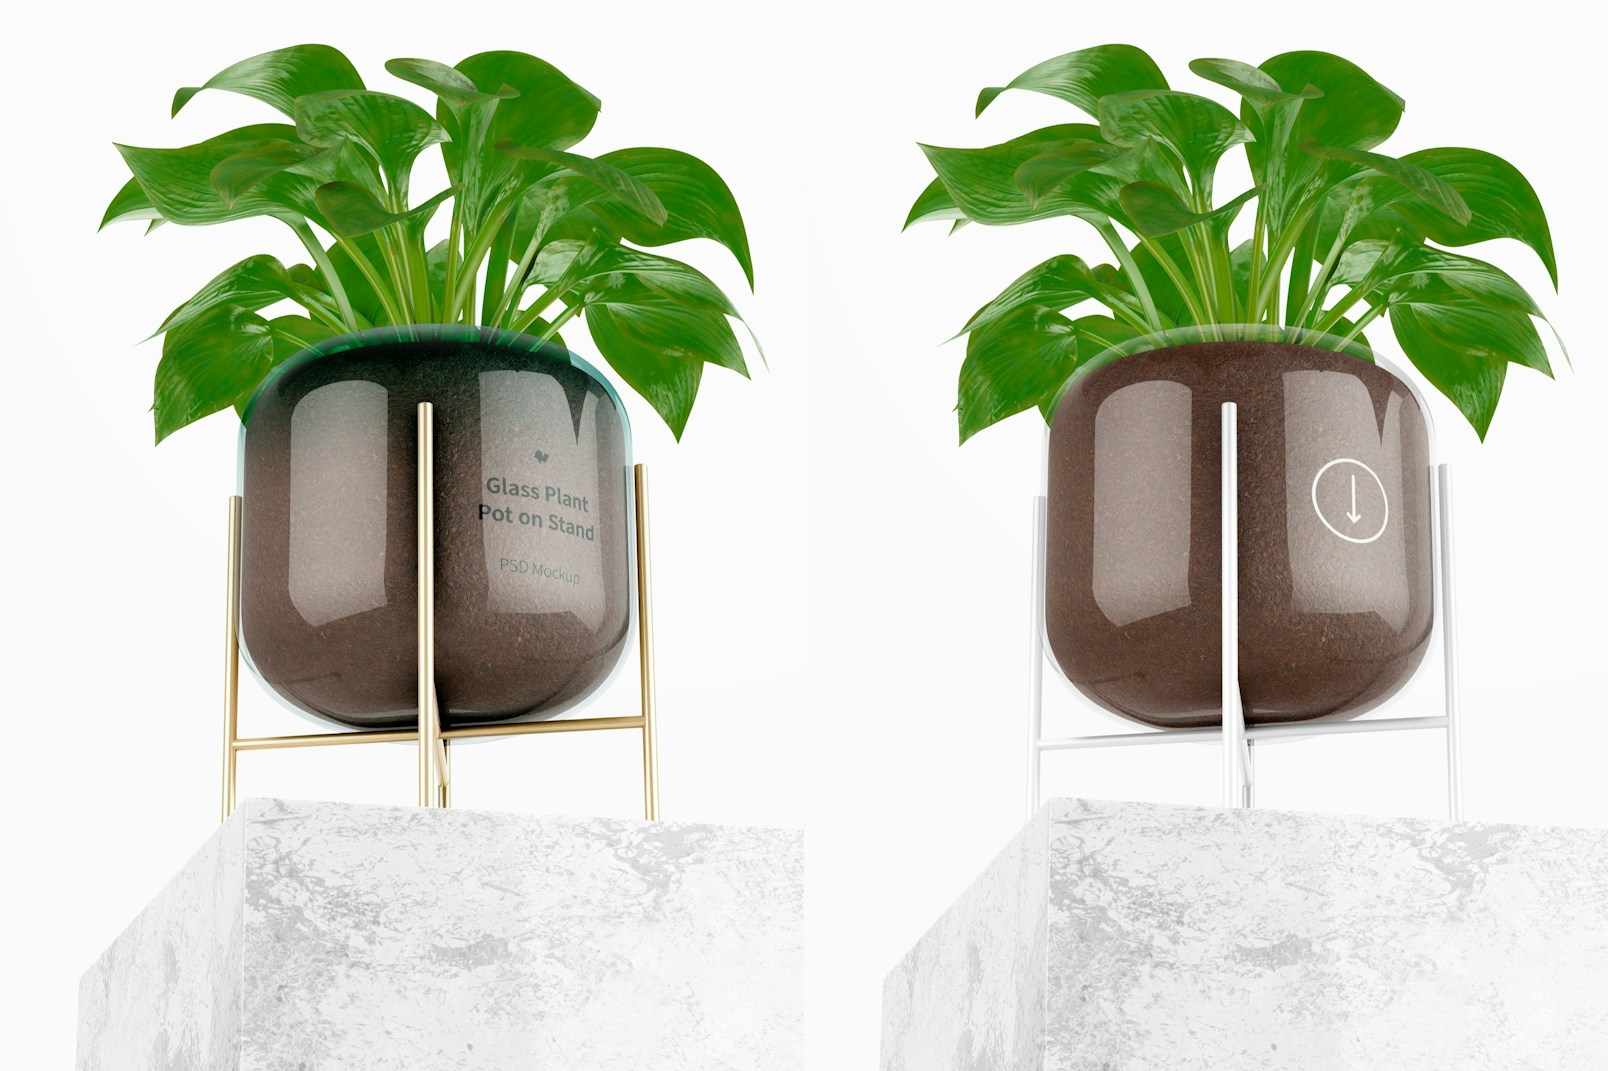 Glass Plant Pot on Stand Mockup, Low Angle View